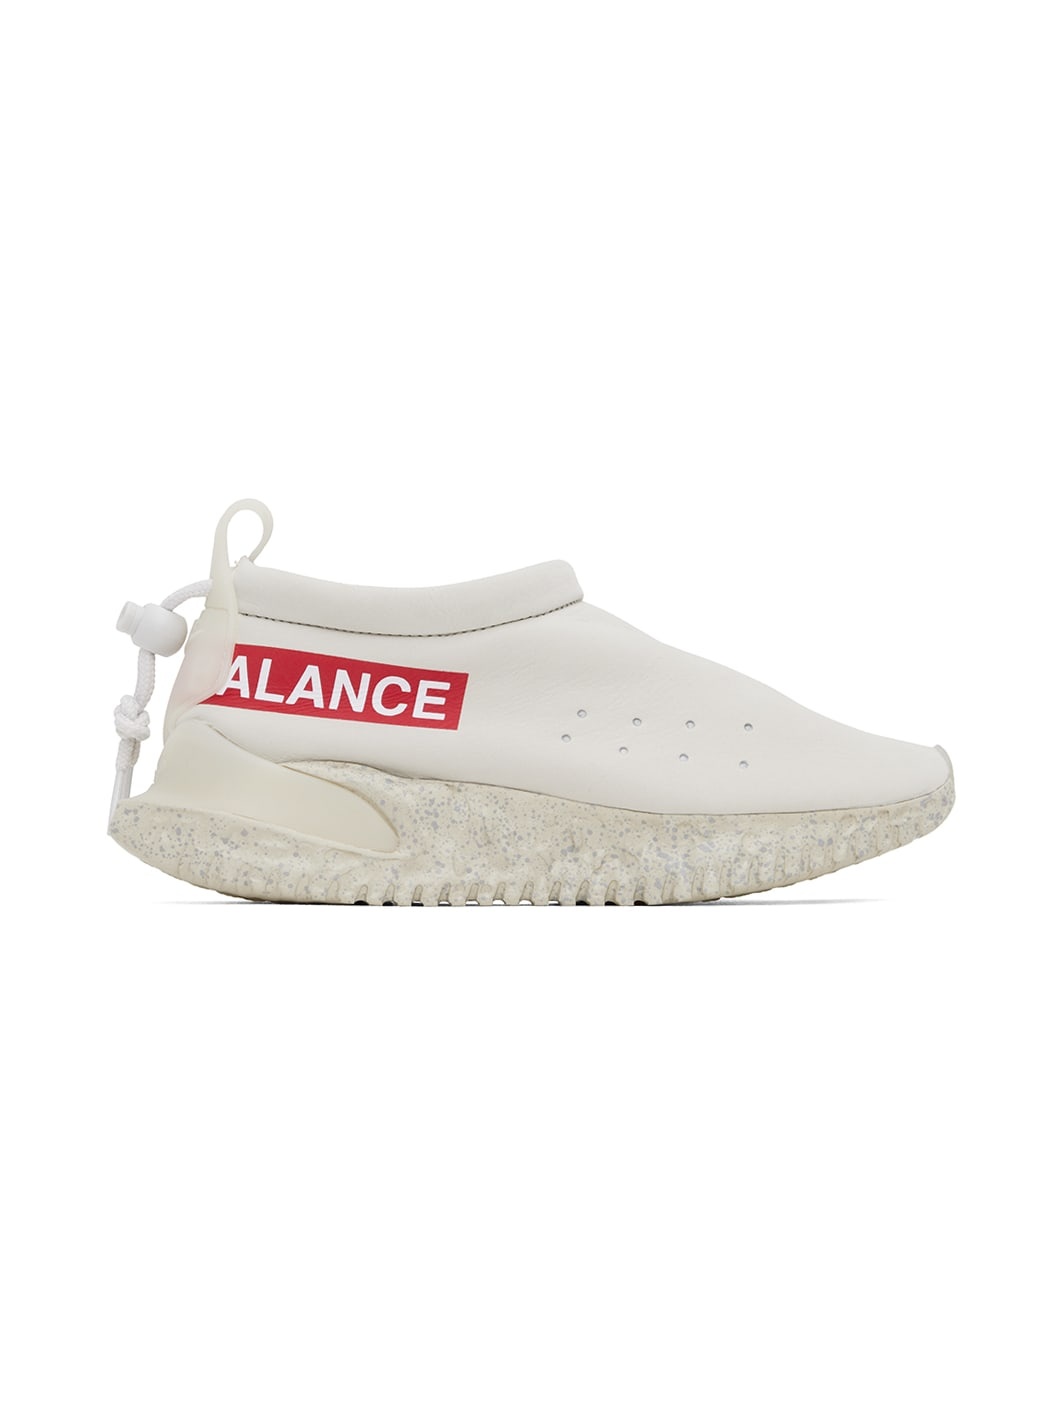 Off-White UNDERCOVER Edition Moc Flow SP Sneakers - 1